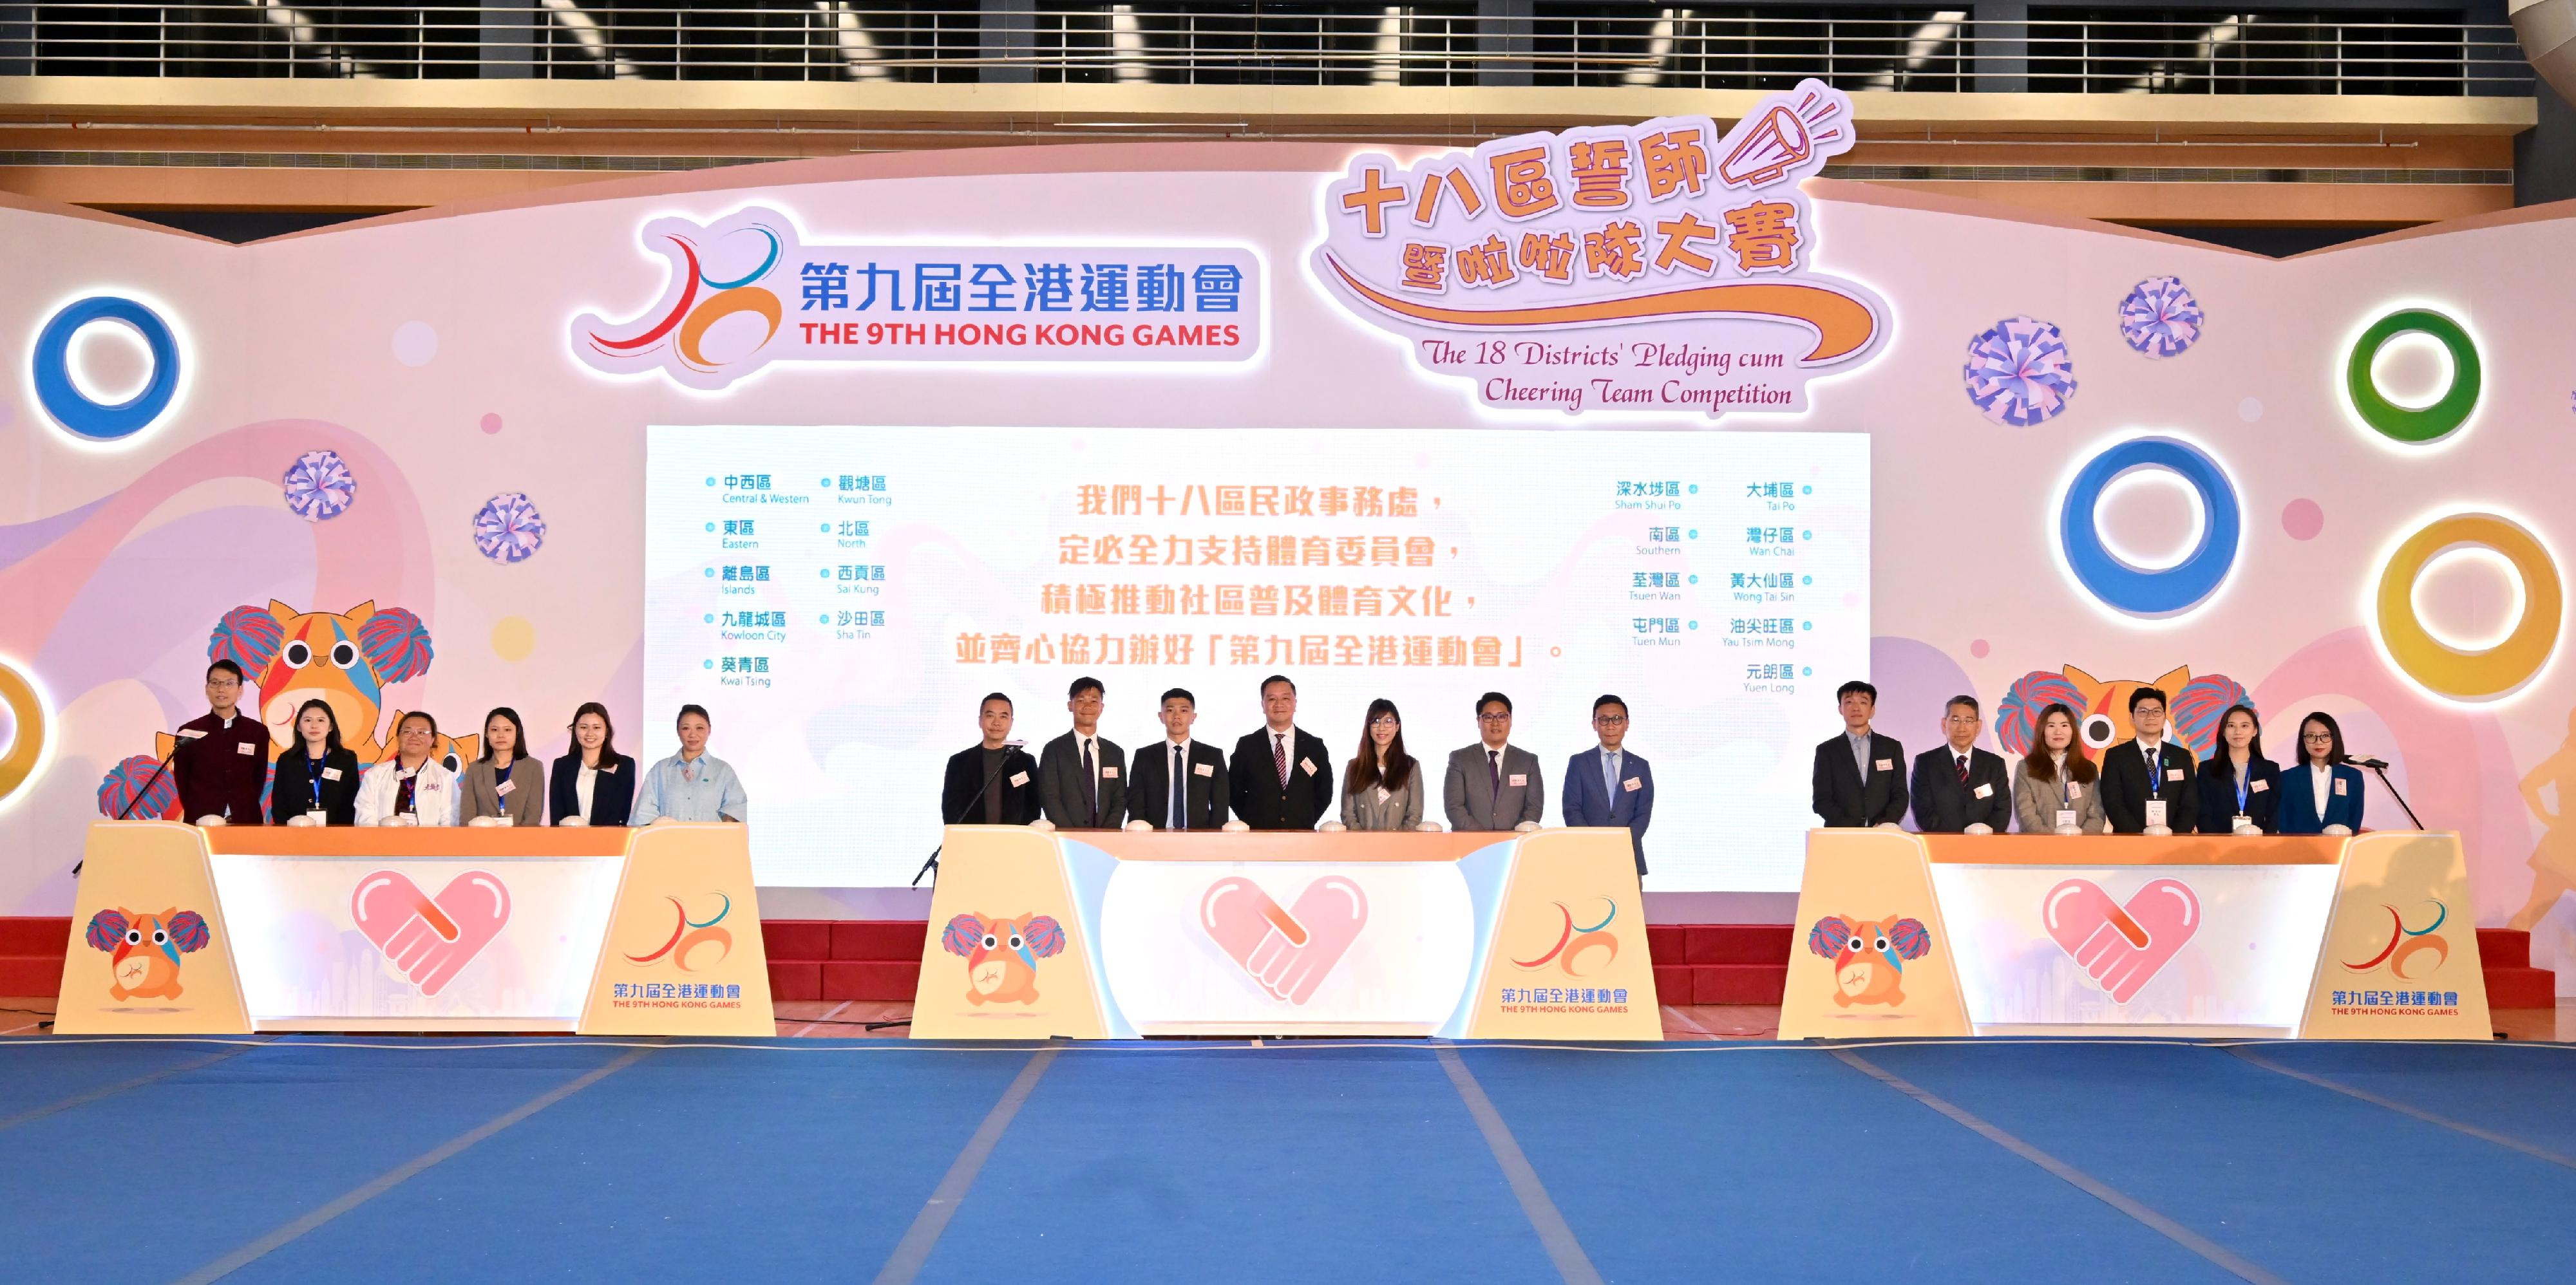 The Chairman of the 9th Hong Kong Games (HKG) Organising Committee, Professor Patrick Yung (centre), today (February 25) witnesses representatives of the 18 District making a pledge on the readiness of athletes to strive for their best in the HKG. 